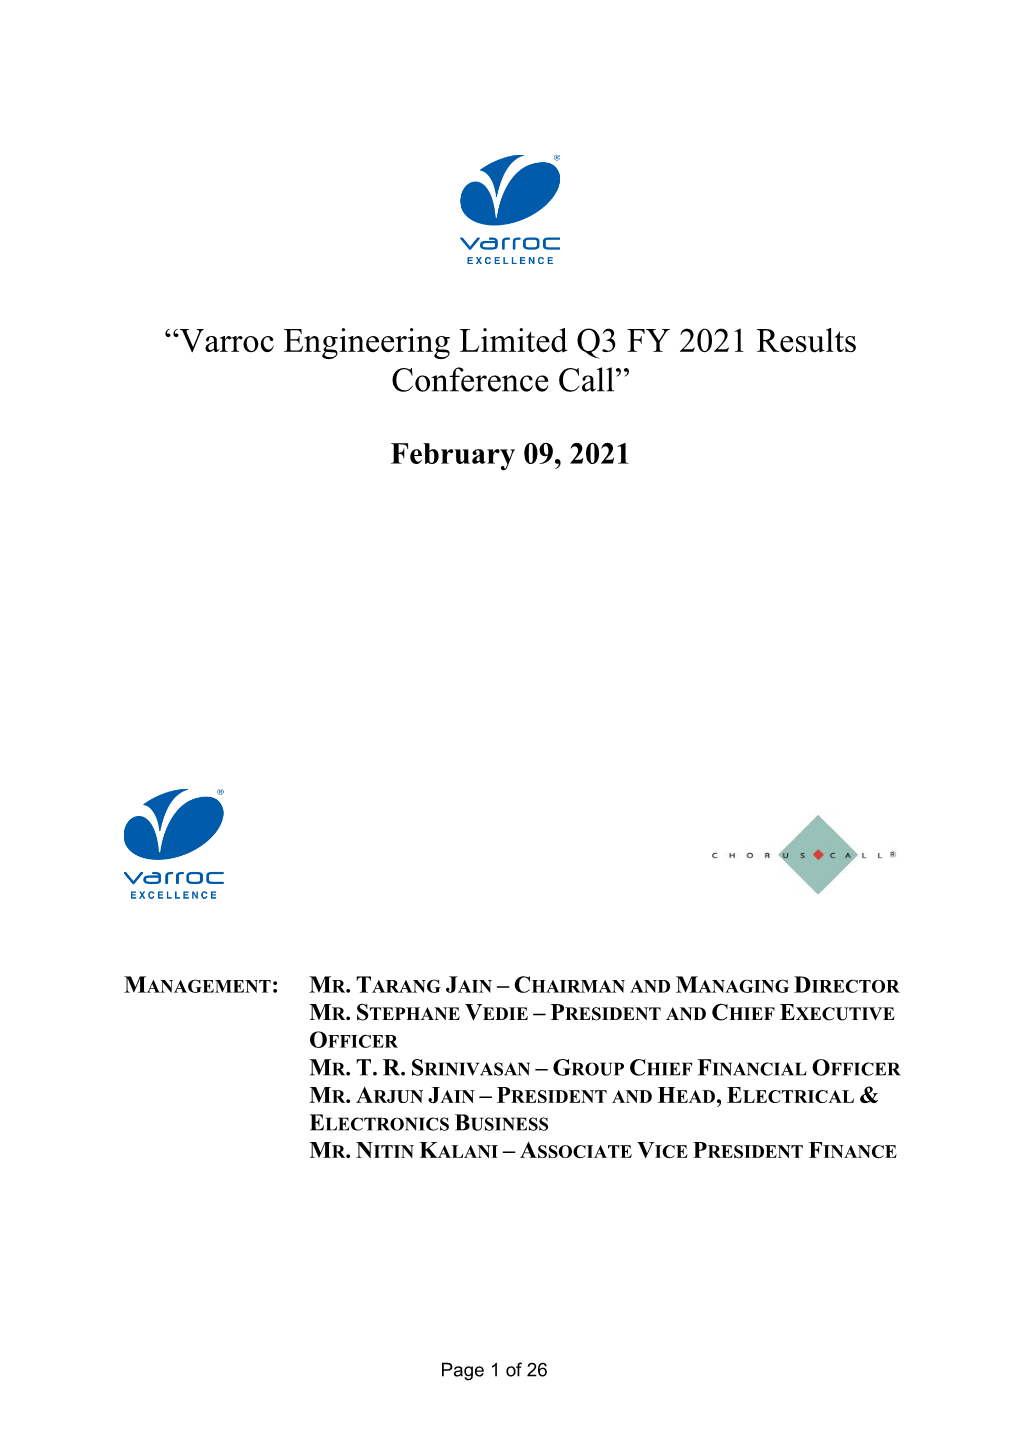 “Varroc Engineering Limited Q3 FY 2021 Results Conference Call”